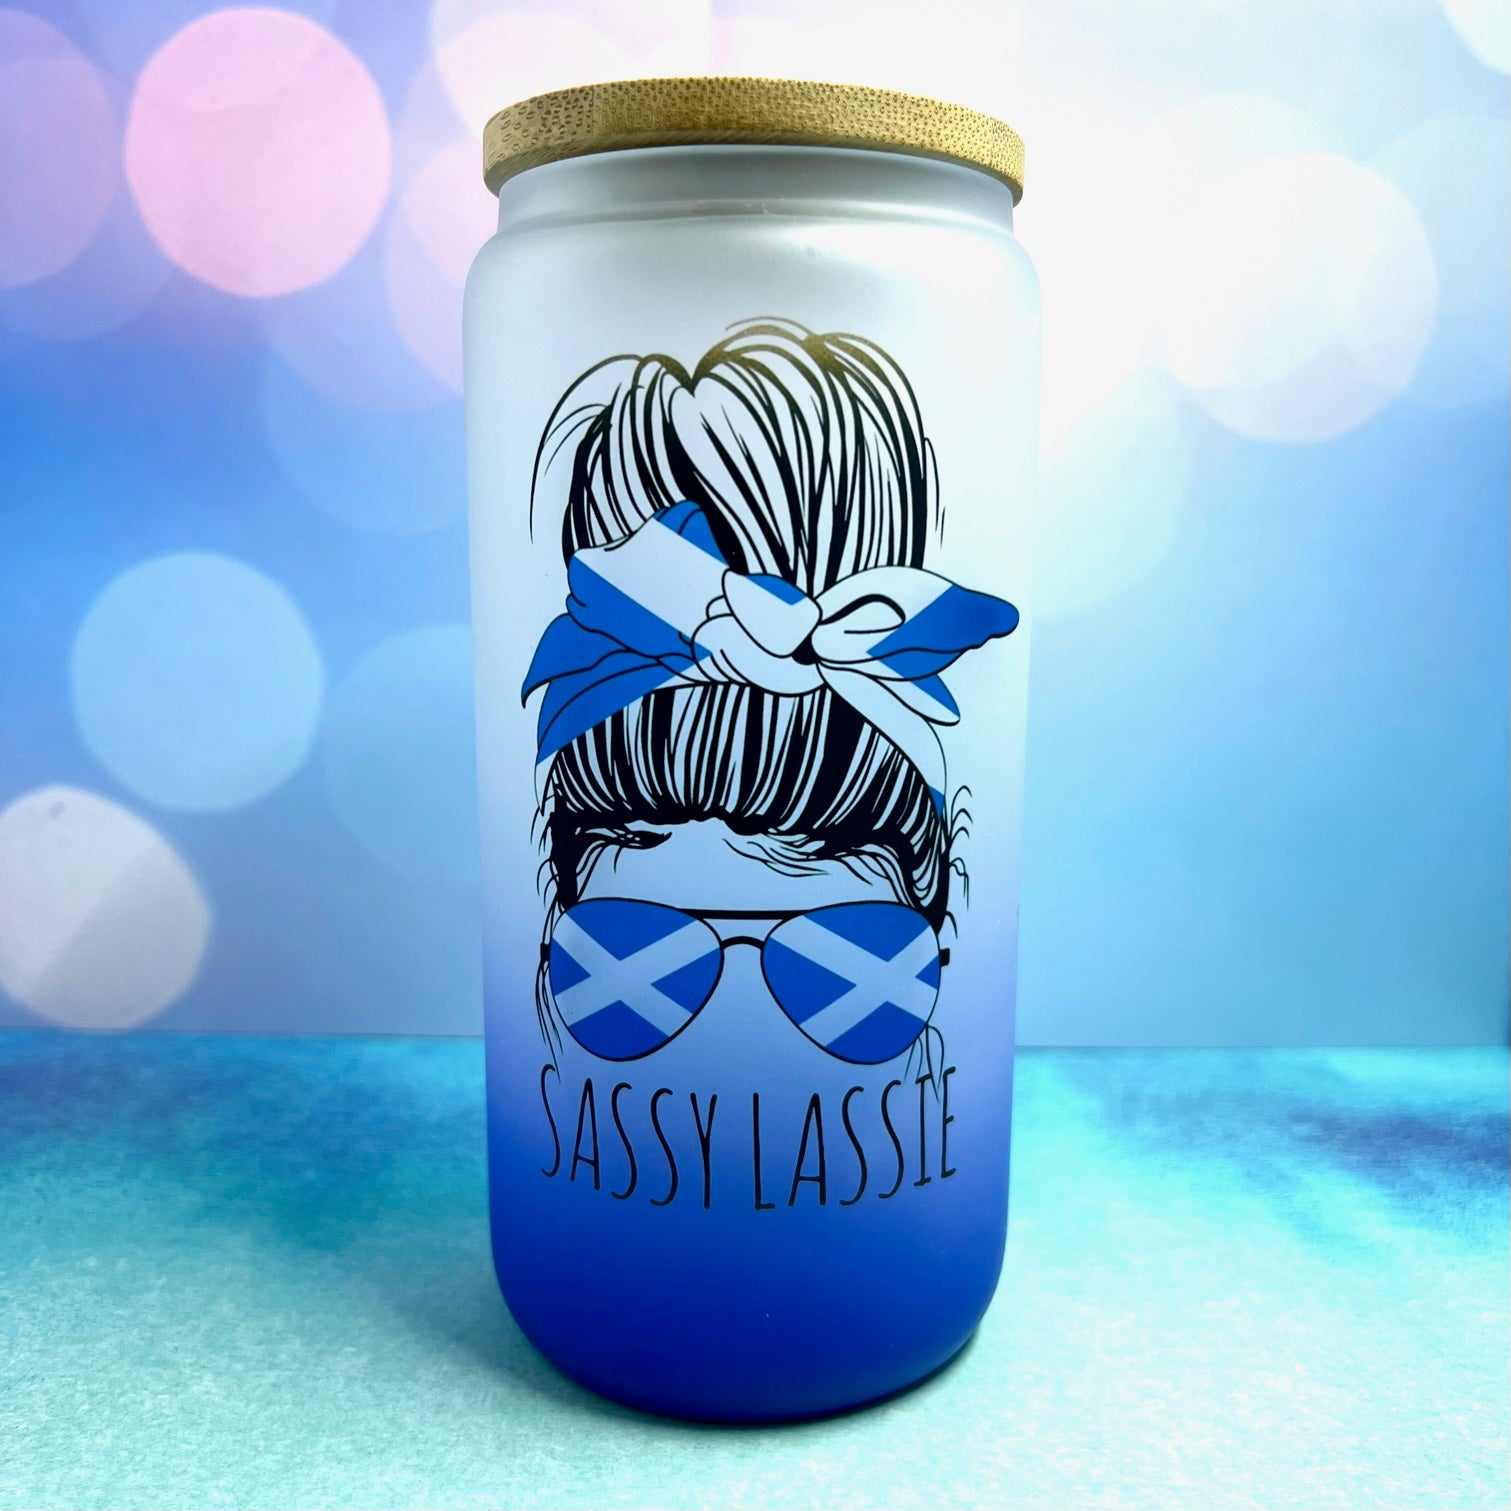 Sassy Lassie Messy Bun 18oz Frosted Beer Can Glass with Bamboo Lid and Straw